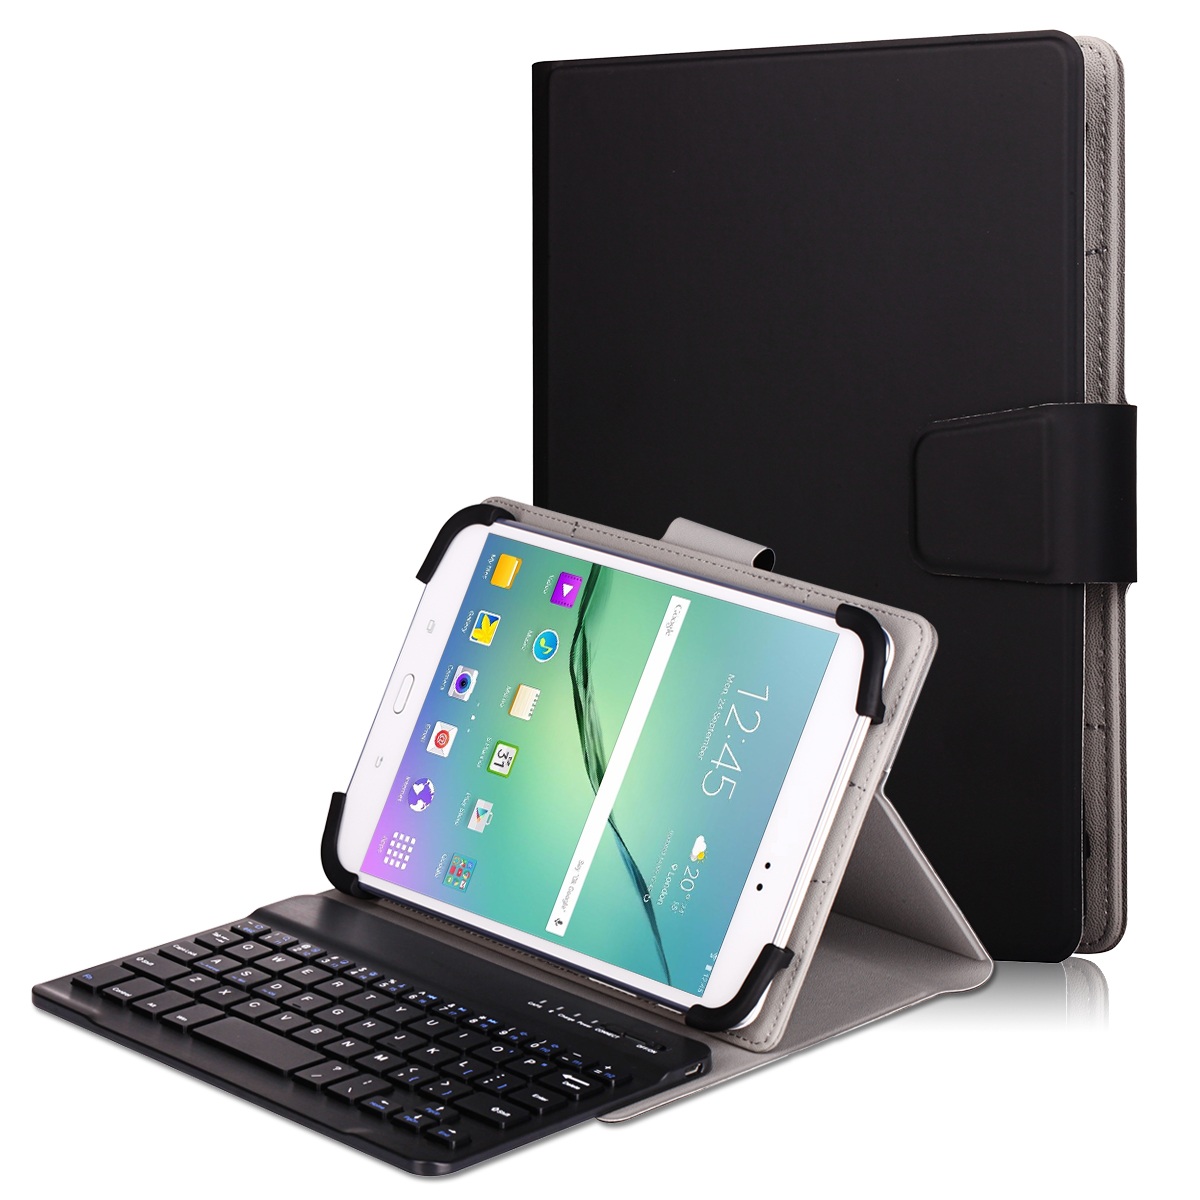 Universal 9-10 inch & 7-8inch tablet bluetooth keyboard case with PU leather cover